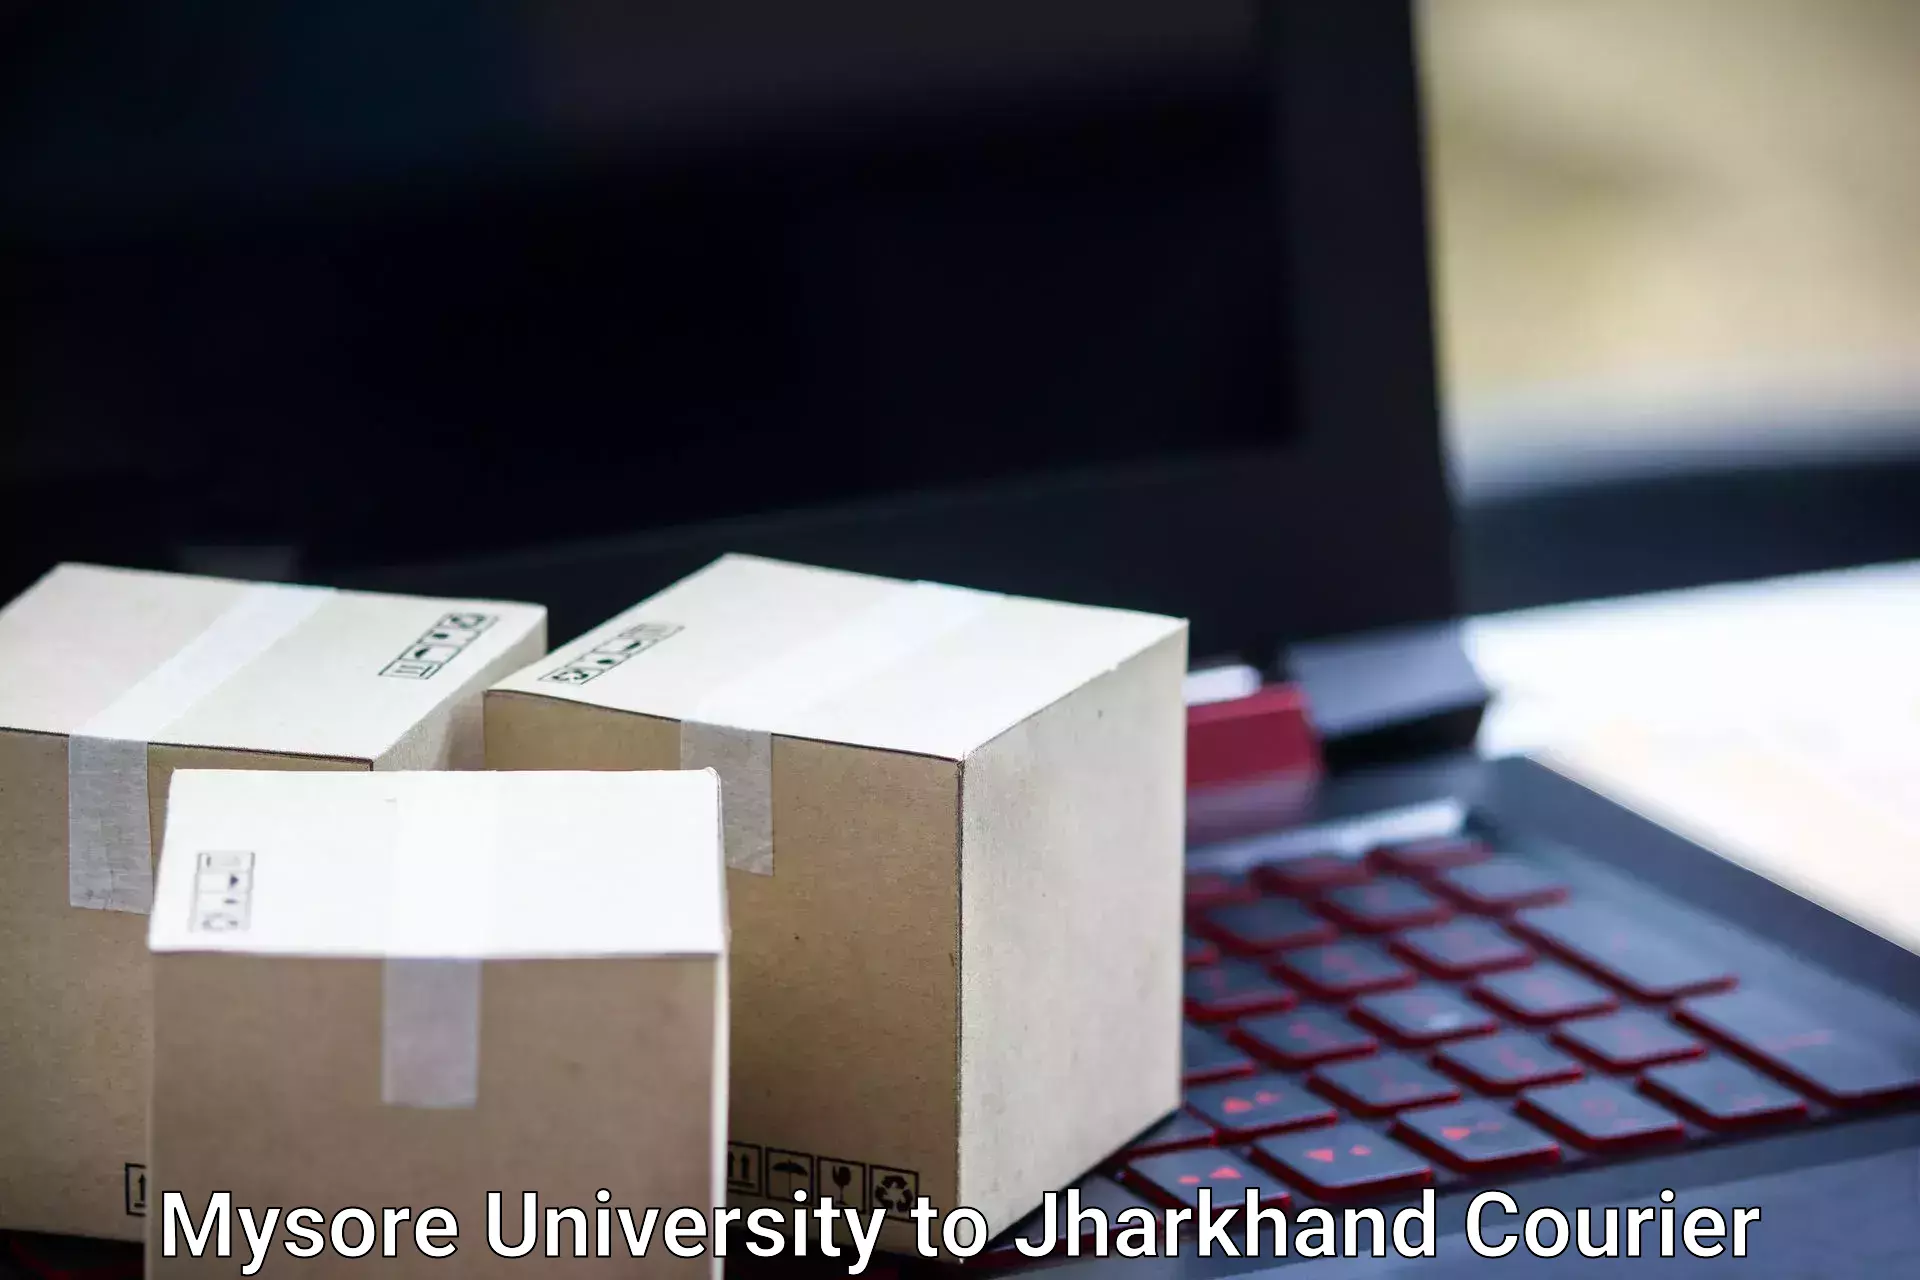 Luggage shipment tracking in Mysore University to Jharkhand